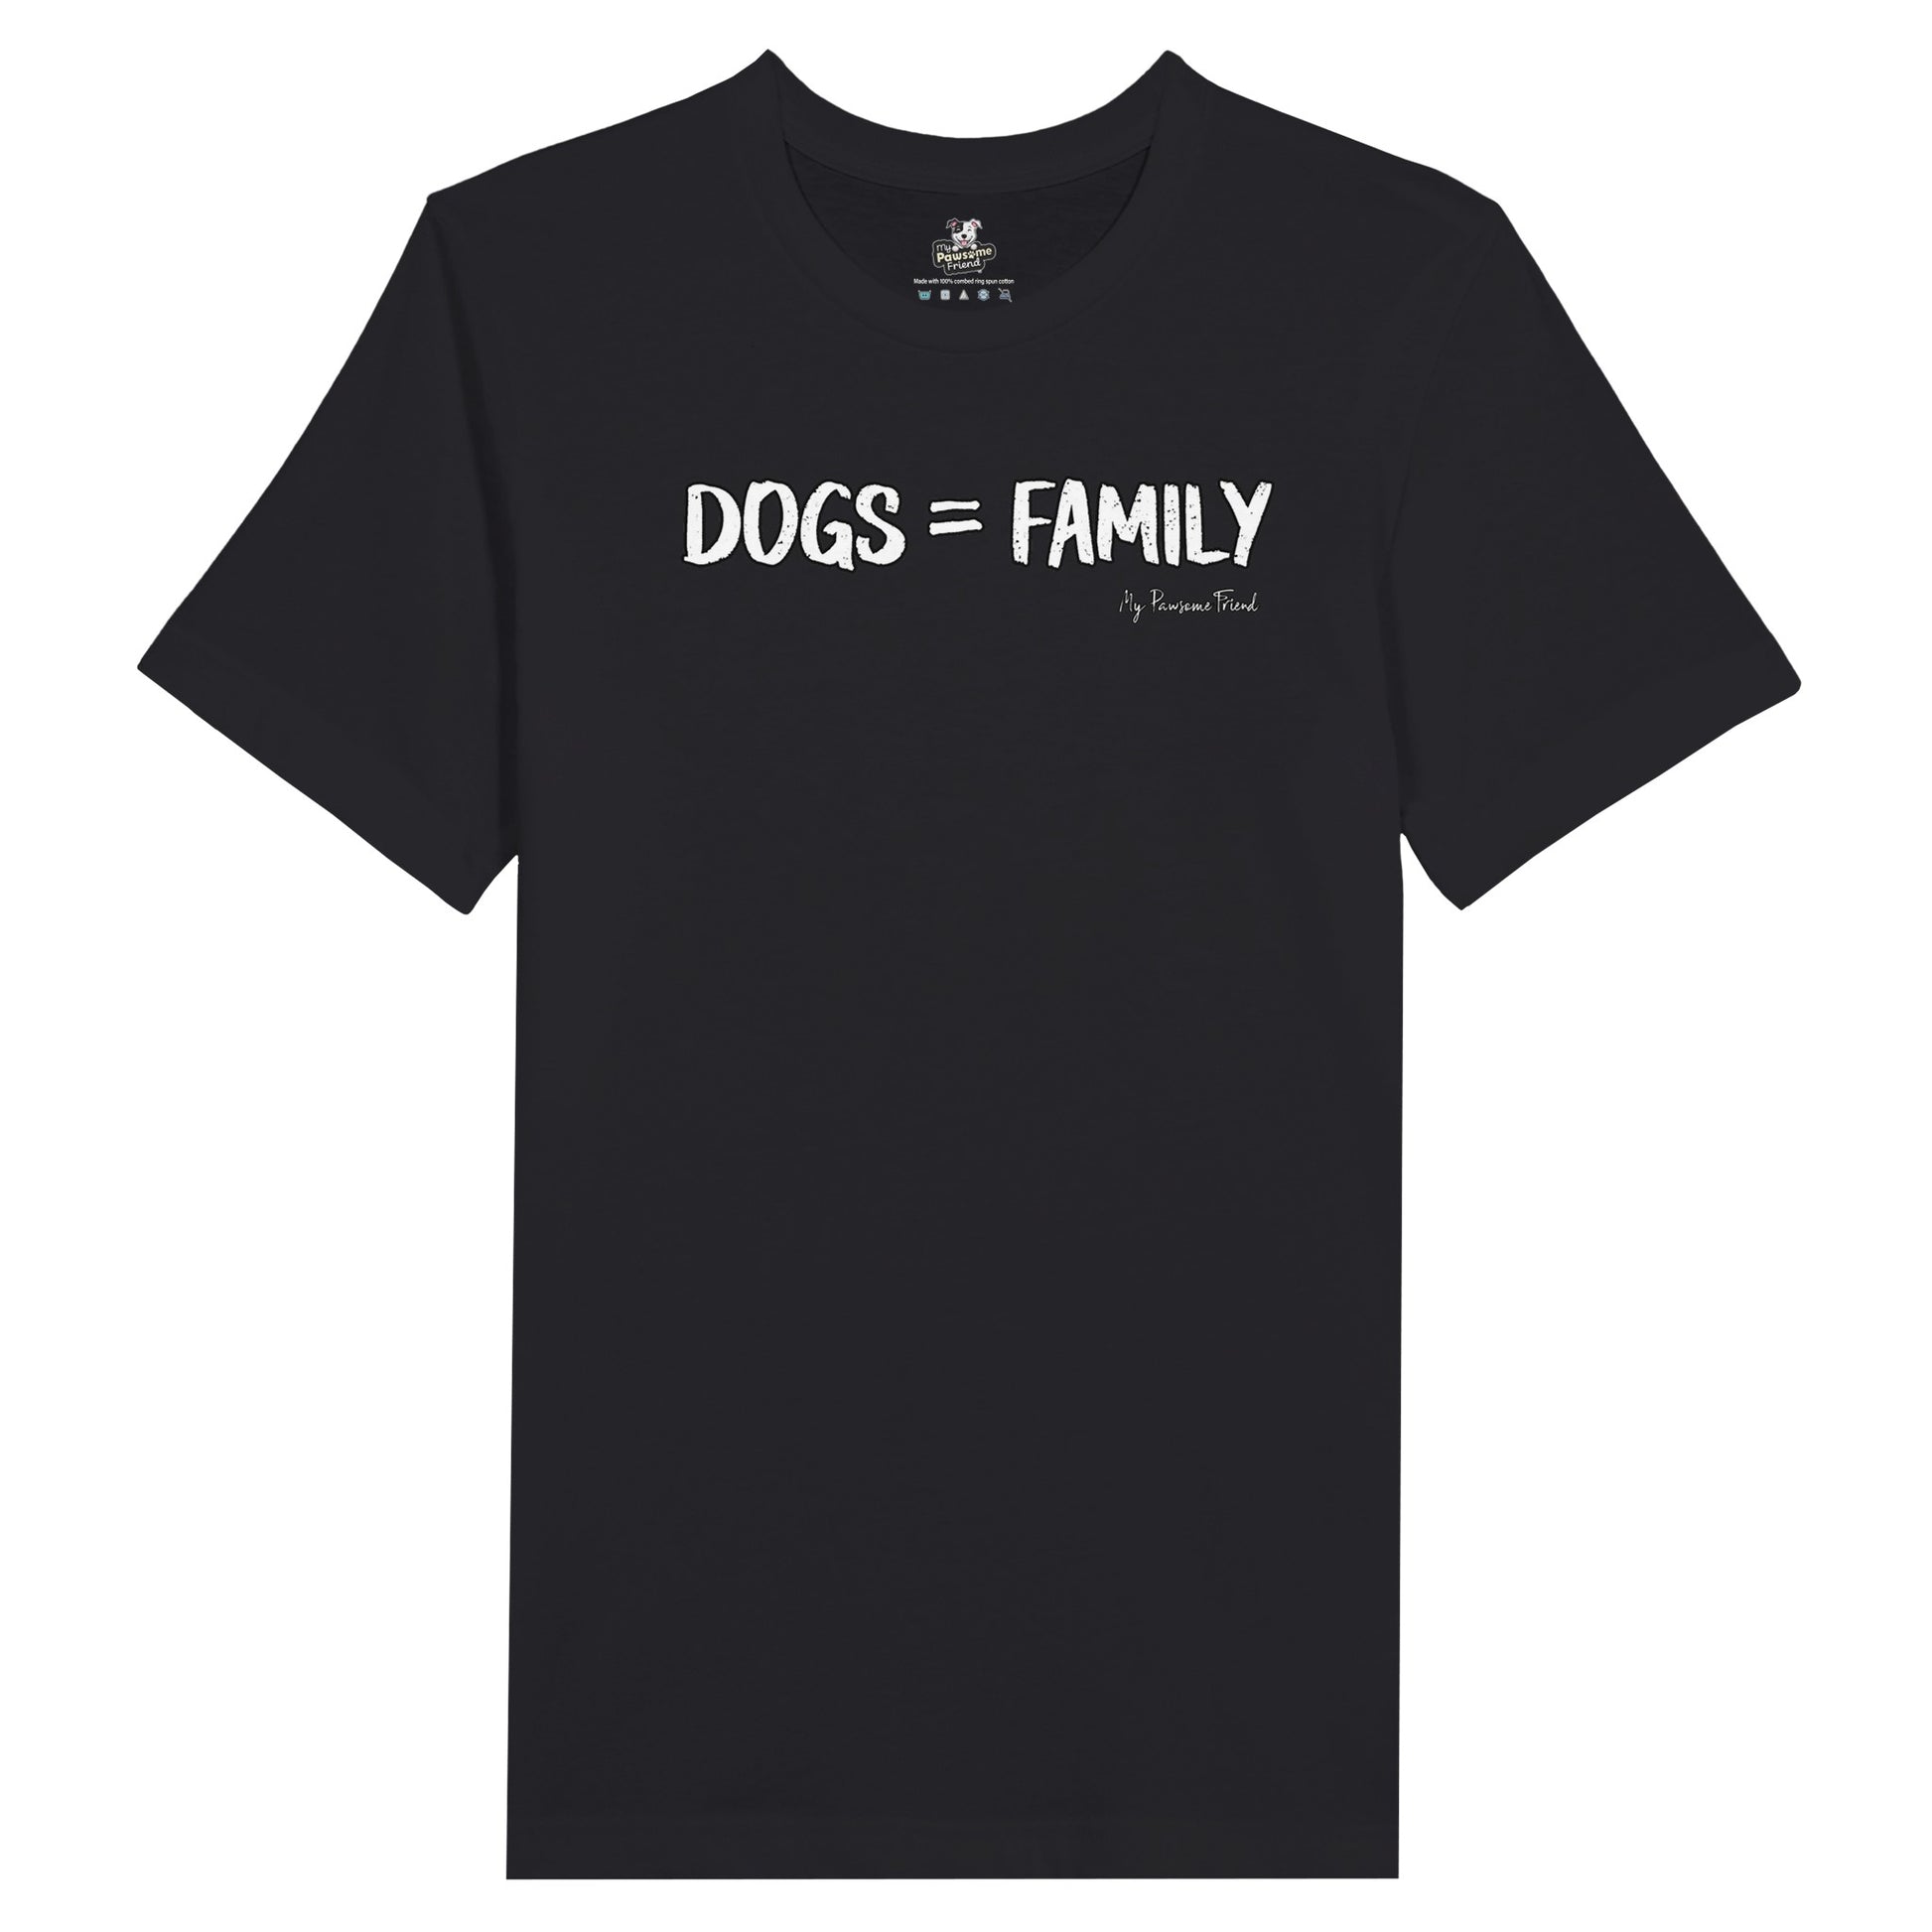 Unisex T-shirt with the message "Dogs = Family". The color of the unisex t-shirt is black